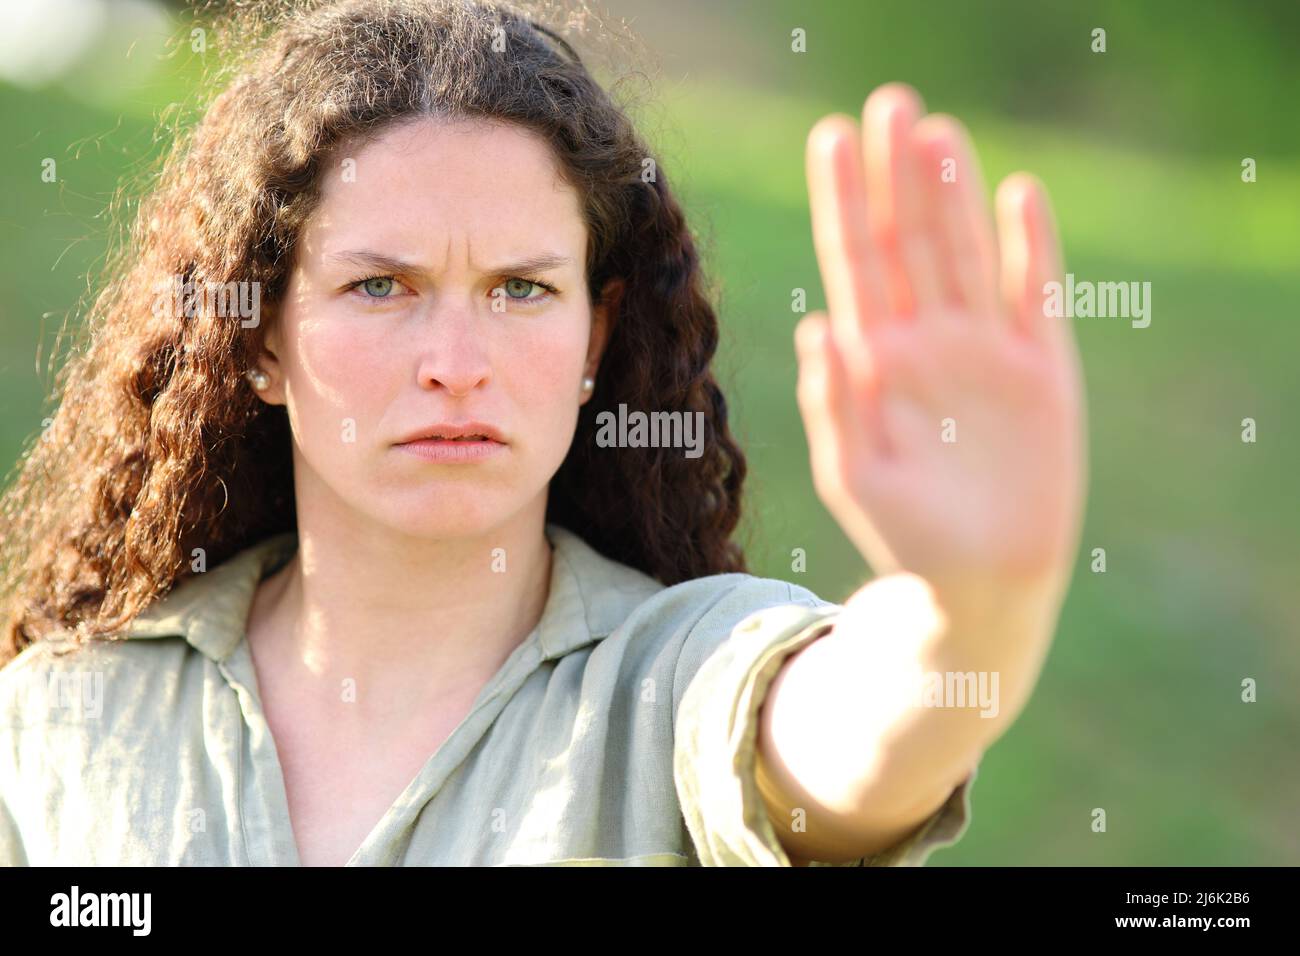 Front view portrait of an angry woman gesturing stop with palm in a park Stock Photo